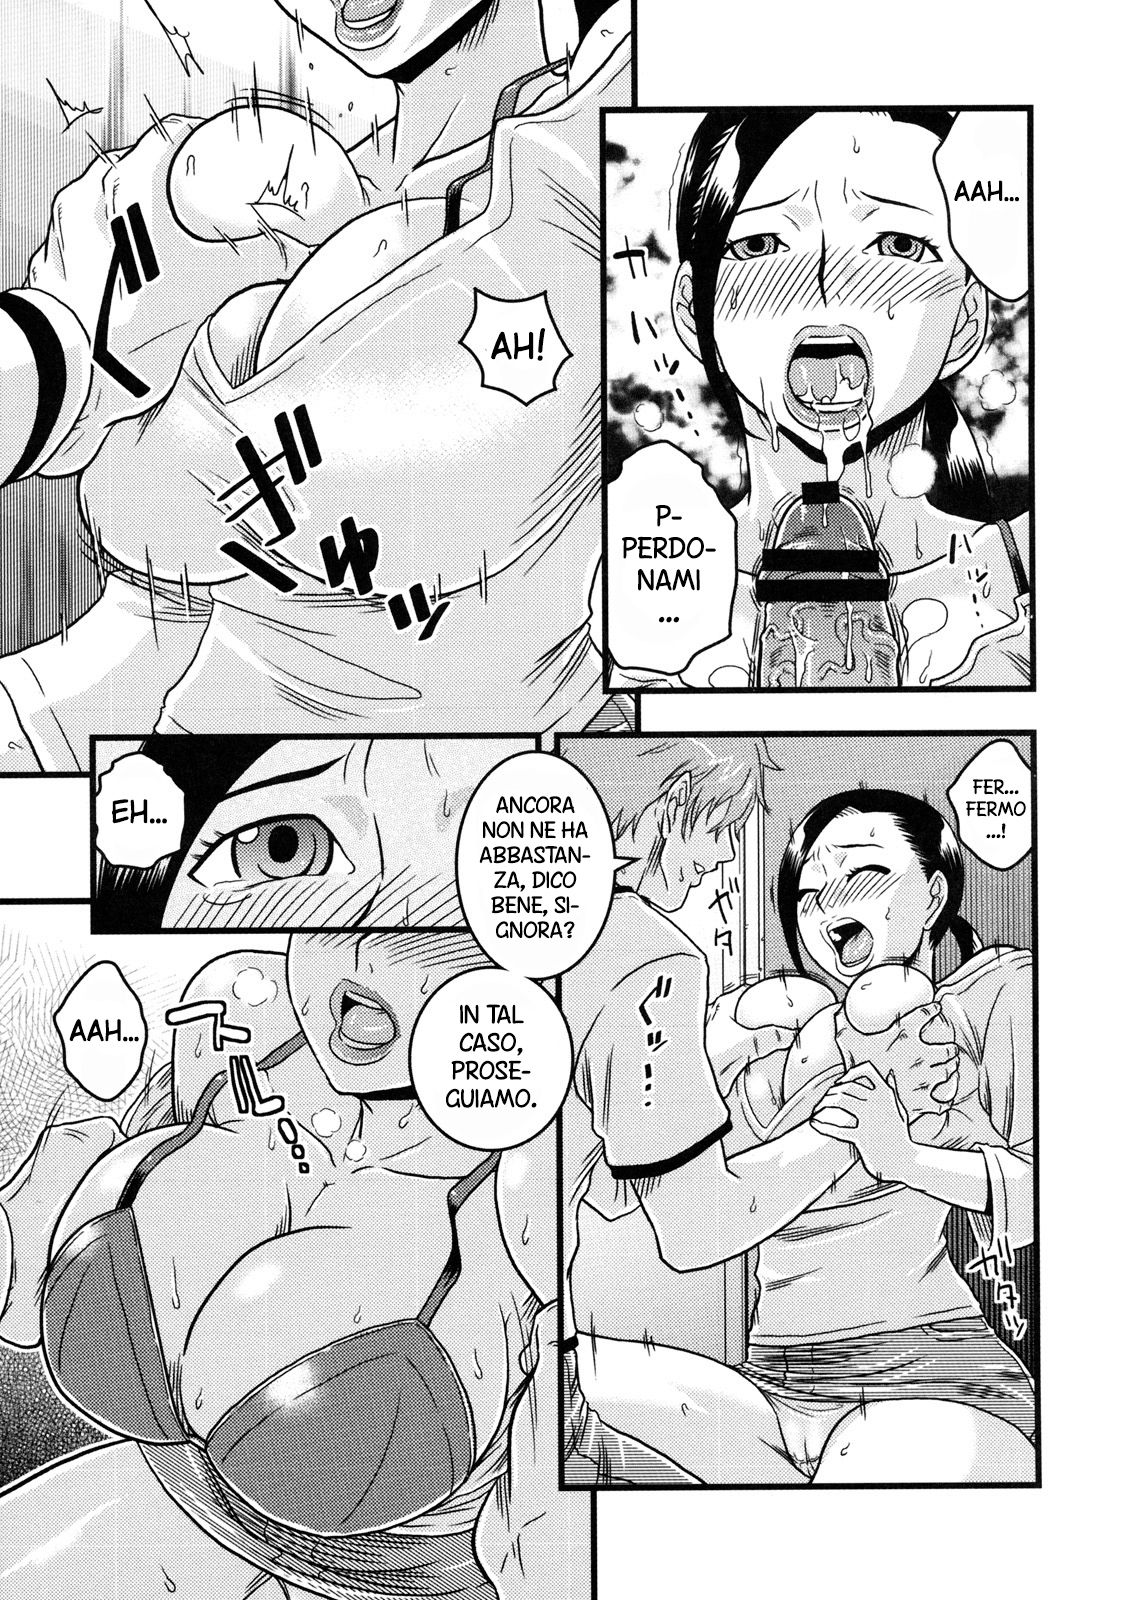 [Murata.] untitled | Provocative Housewife (Shinzui EARLY SUMMER ver. VOL. 2) [Italian] {Hentai Extra} [ムラタ。] 無題 (真髄 EARLY SUMMER ver. VOL.2) [イタリア翻訳]